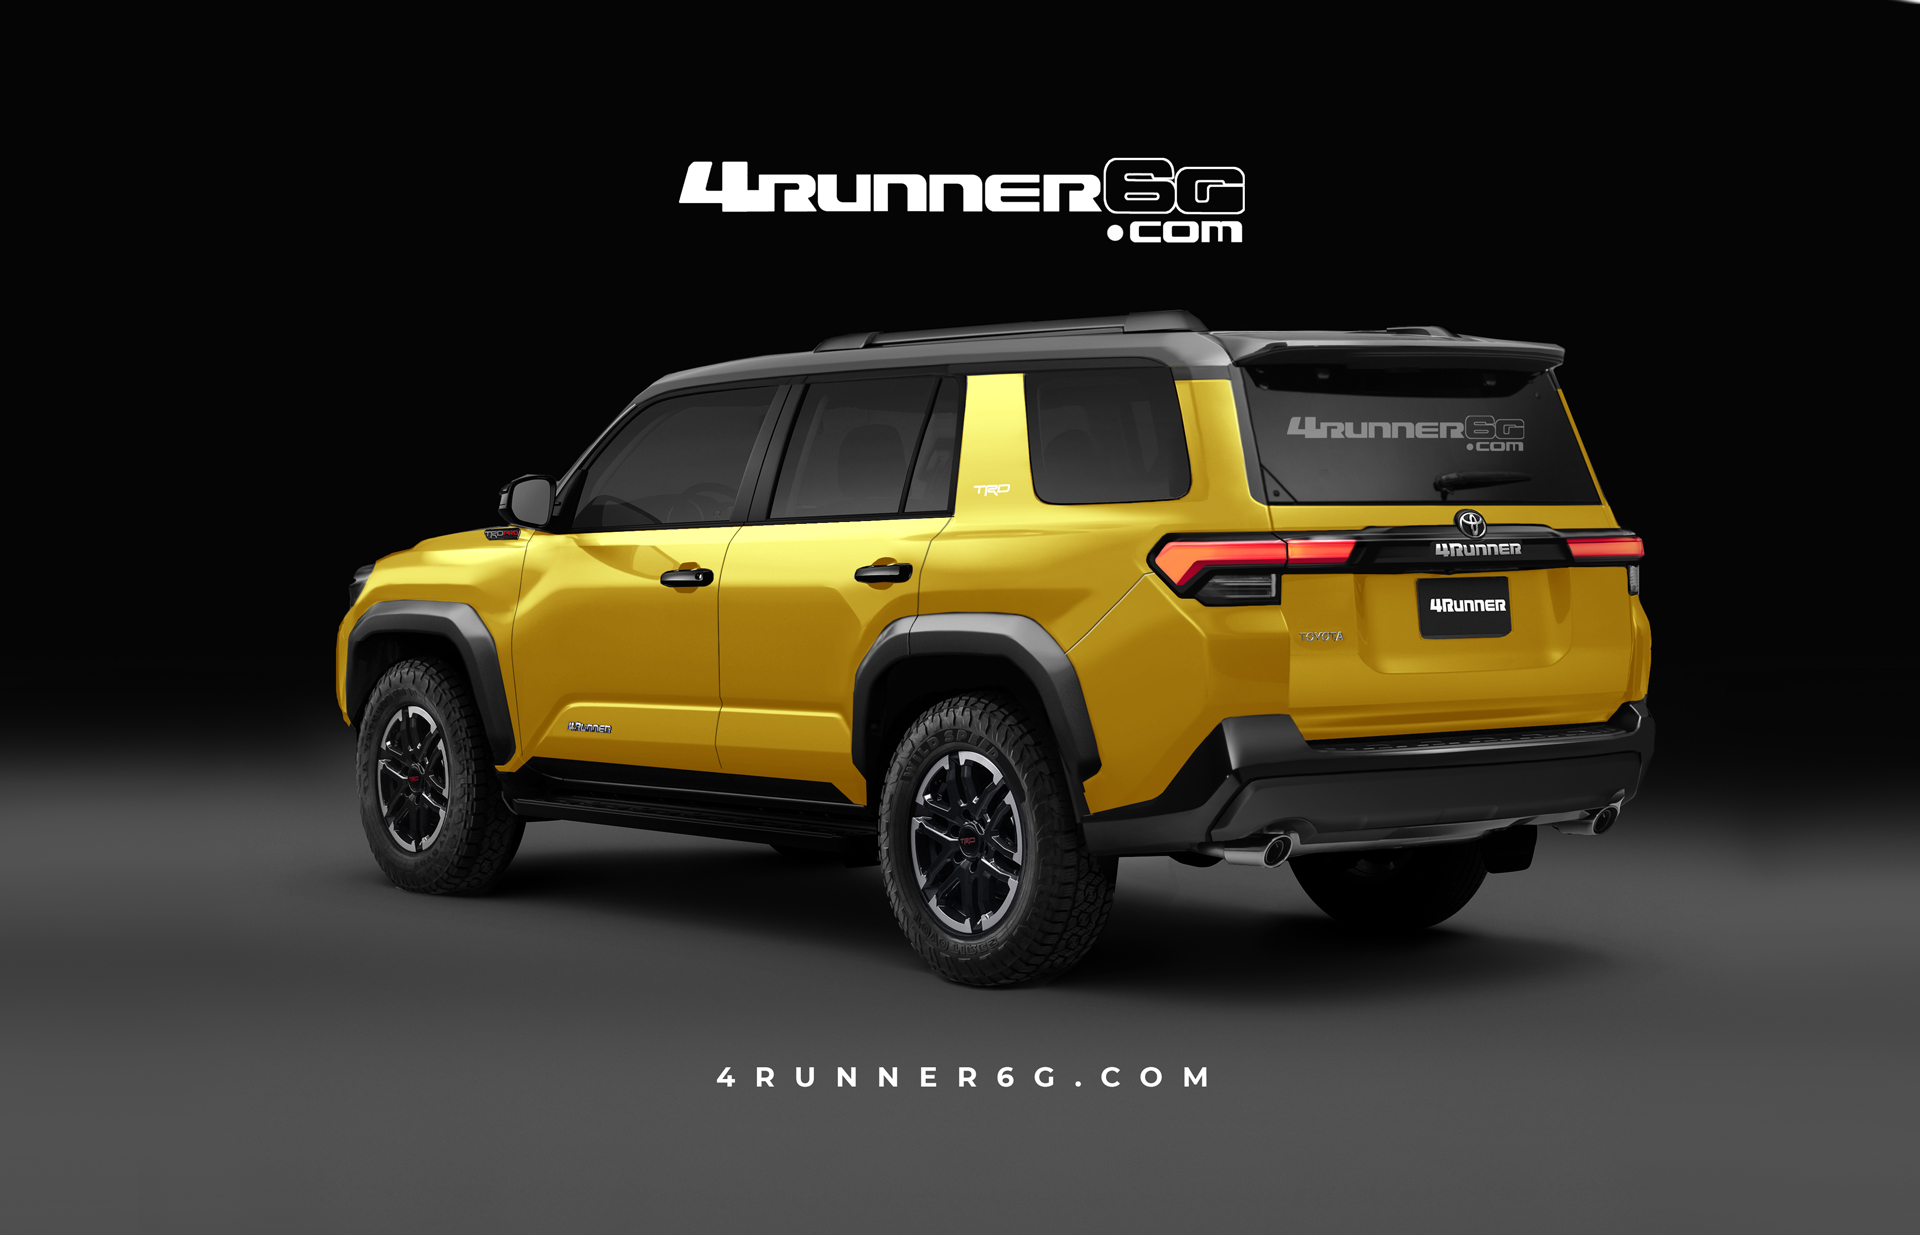 2025 Toyota 4runner 2025 4Runner (6th Gen) News, Specs, Engines, Release Date, Production Date & Preview Renderings -- Insider Info (as of 7/30/23) 2025 Toyota-4Runner-Rear-S-Yellow